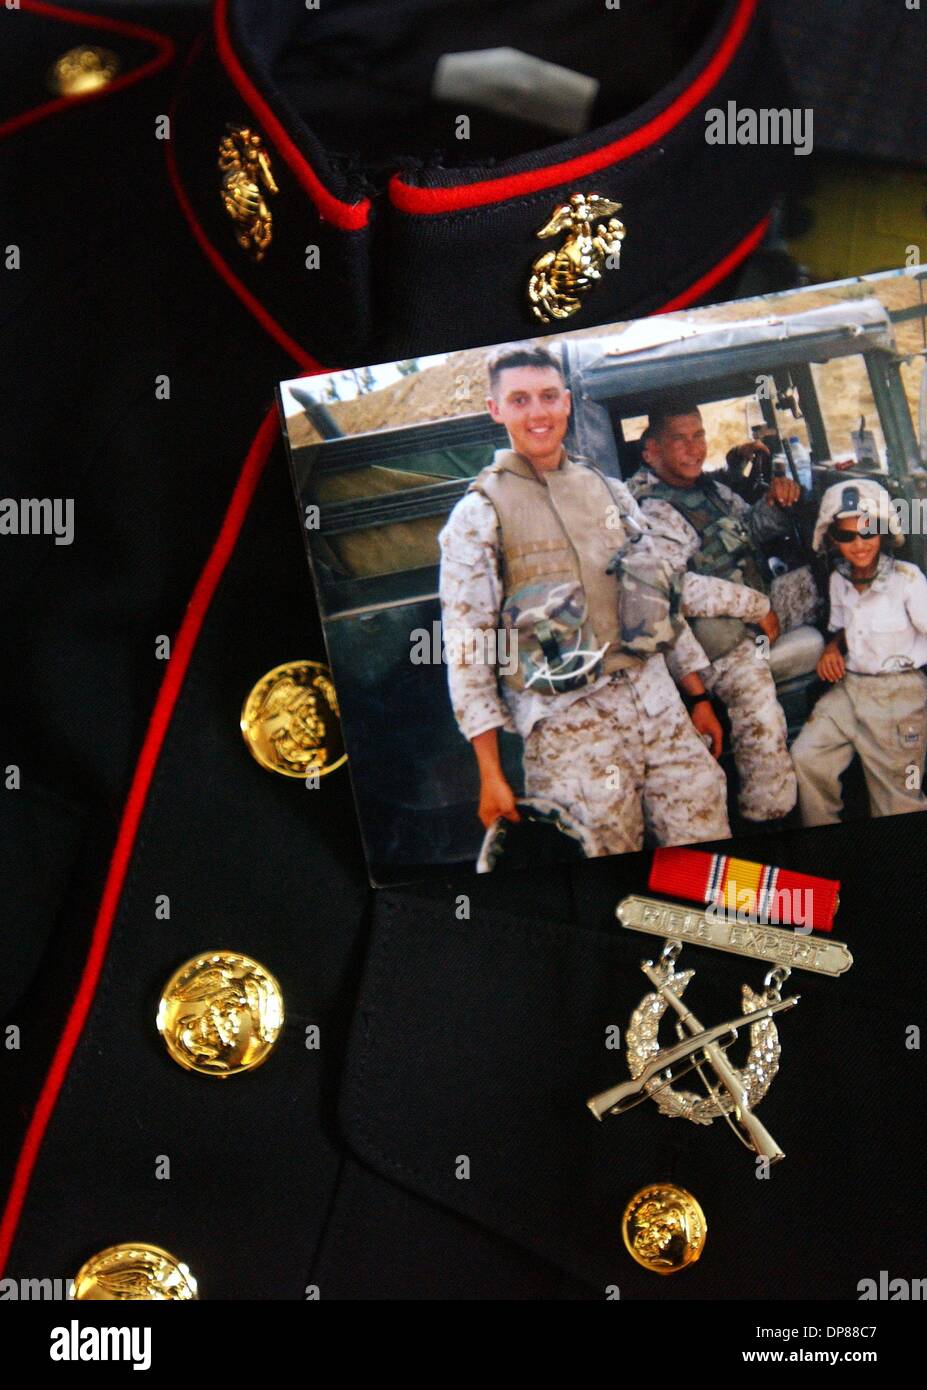 (Published 10/17/2004, A-1) NC KYLE 228579 x005 ............. 23 September, 2004, Nebraska ........... Months later Wain and Dixie Codner (cq) must decide what to do with their son's Marine dress blue uniform along with the many photos of their son taken while deployed to Iraq.  Kyle Codner was a U.S. Marine stationed at Camp Pendleton and deployed to Iraq was killed in back in May Stock Photo